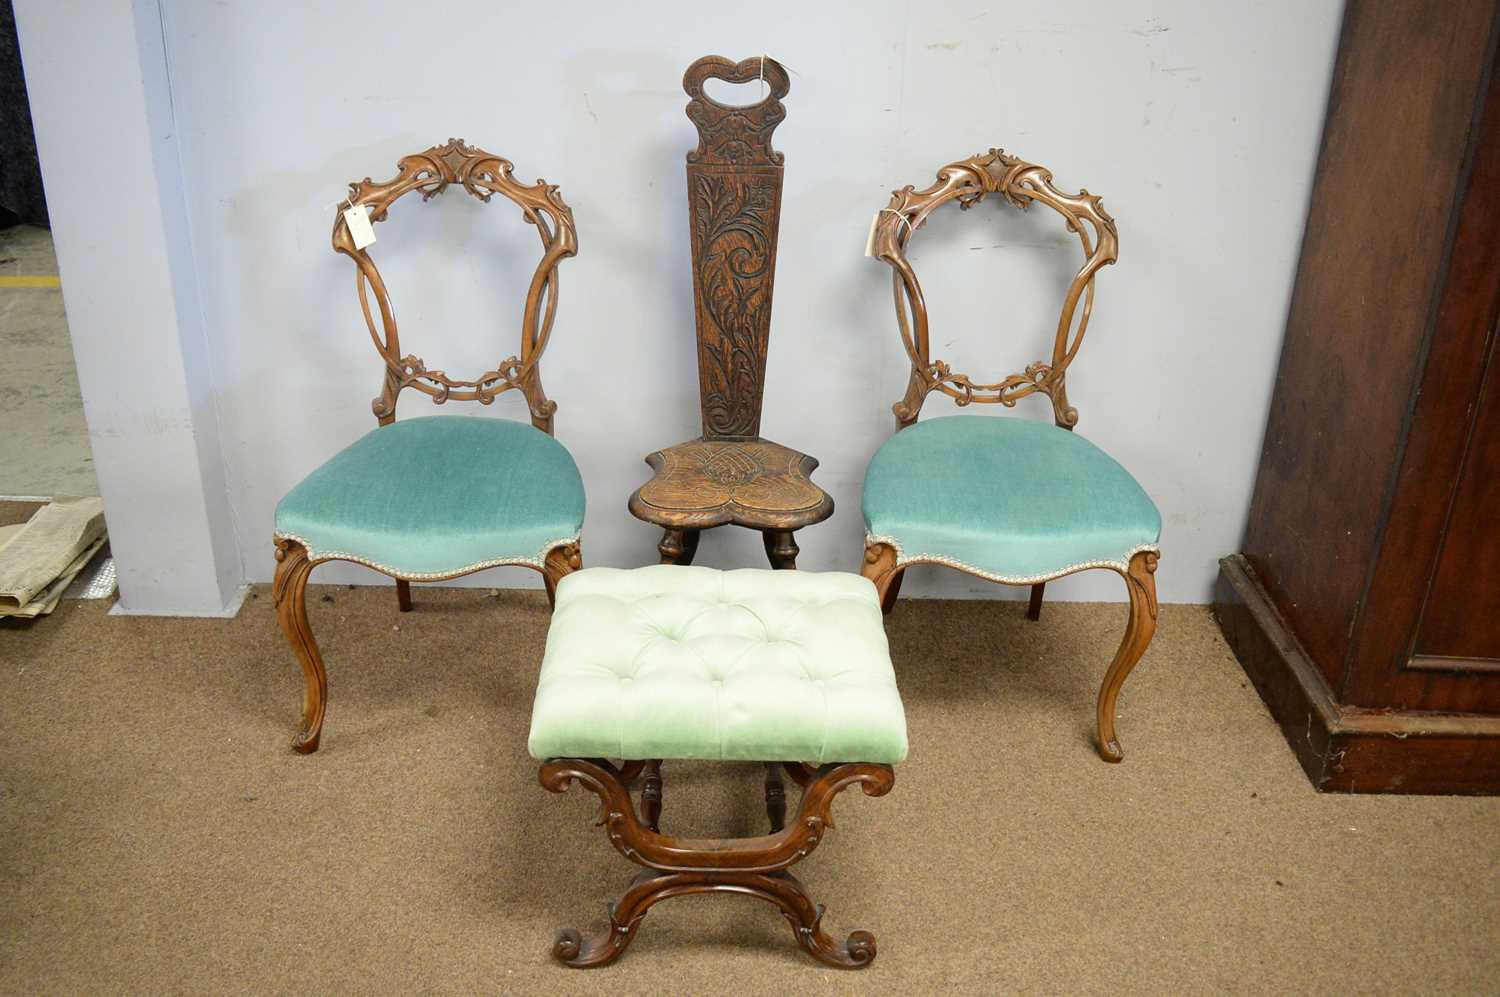 Lot 87 - Pair of Victorian balloon-back chairs; a 20th C spinning chair; and a Regency-style stool.